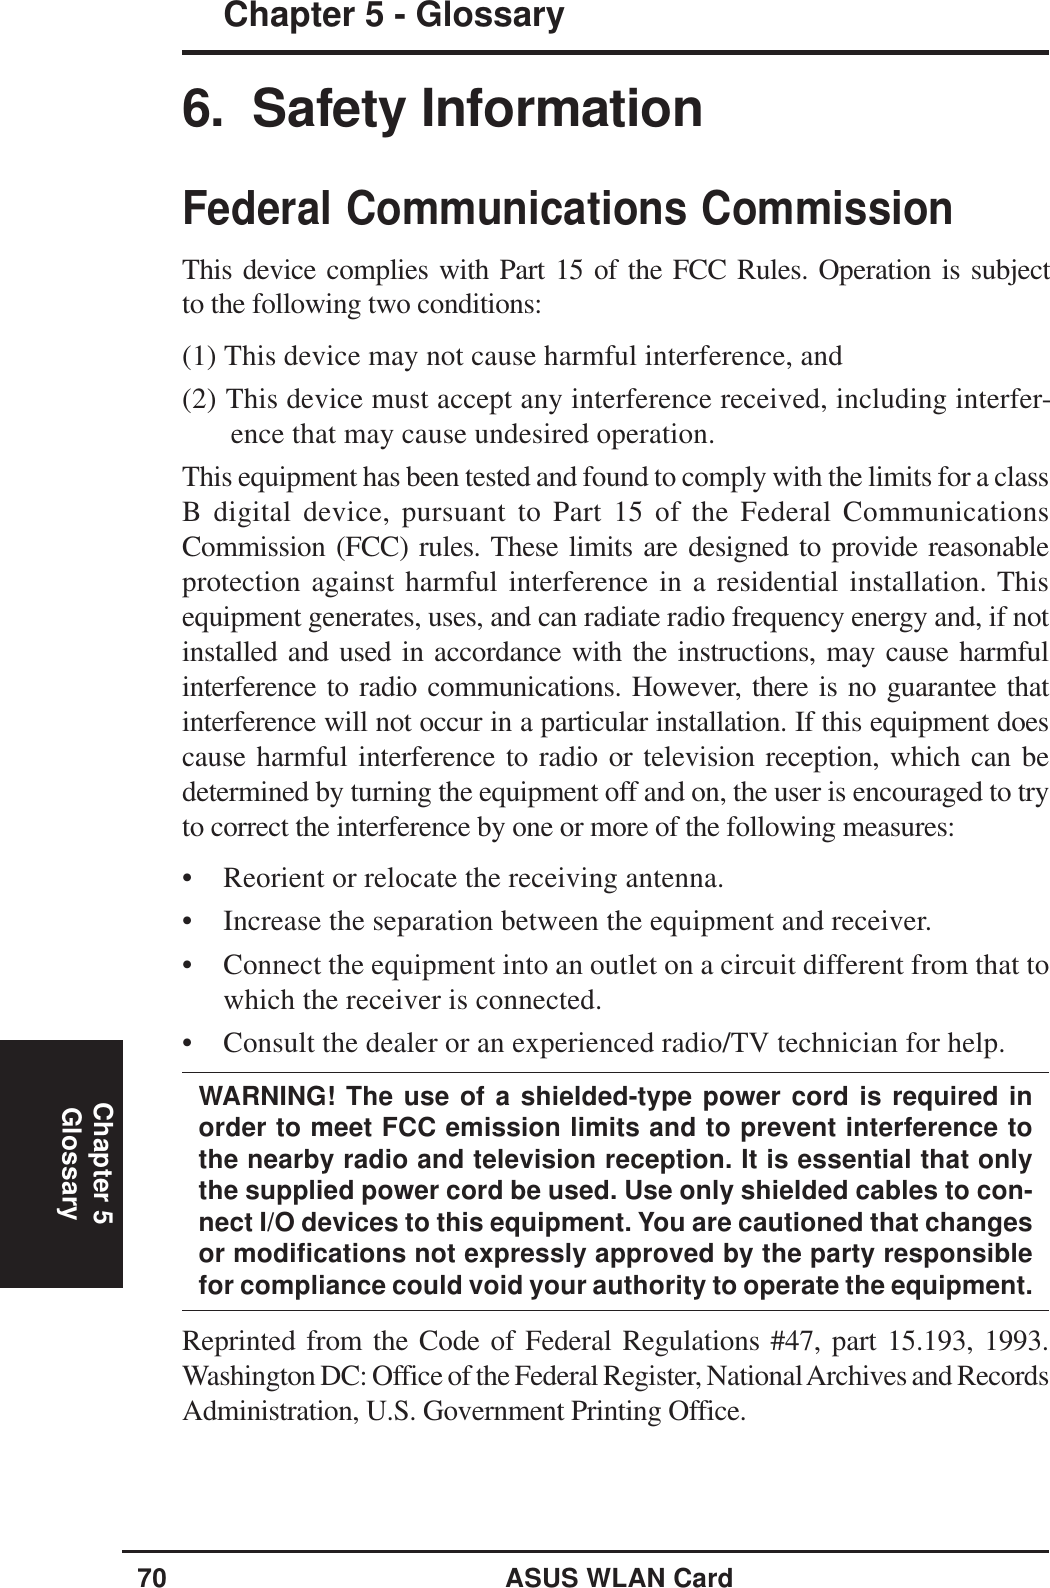 70 ASUS WLAN CardChapter 5Chapter 5 - GlossaryGlossary6.  Safety InformationFederal Communications CommissionThis device complies with Part 15 of the FCC Rules. Operation is subjectto the following two conditions:(1)  This device may not cause harmful interference, and(2)  This device must accept any interference received, including interfer- ence that may cause undesired operation.This equipment has been tested and found to comply with the limits for a classB digital device, pursuant to Part 15 of the Federal CommunicationsCommission (FCC) rules. These limits are designed to provide reasonableprotection against harmful interference in a residential installation. Thisequipment generates, uses, and can radiate radio frequency energy and, if notinstalled and used in accordance with the instructions, may cause harmfulinterference to radio communications. However, there is no guarantee thatinterference will not occur in a particular installation. If this equipment doescause harmful interference to radio or television reception, which can bedetermined by turning the equipment off and on, the user is encouraged to tryto correct the interference by one or more of the following measures:• Reorient or relocate the receiving antenna.• Increase the separation between the equipment and receiver.• Connect the equipment into an outlet on a circuit different from that towhich the receiver is connected.• Consult the dealer or an experienced radio/TV technician for help.WARNING! The use of a shielded-type power cord is required inorder to meet FCC emission limits and to prevent interference tothe nearby radio and television reception. It is essential that onlythe supplied power cord be used. Use only shielded cables to con-nect I/O devices to this equipment. You are cautioned that changesor modifications not expressly approved by the party responsiblefor compliance could void your authority to operate the equipment.Reprinted from the Code of Federal Regulations #47, part 15.193, 1993.Washington DC: Office of the Federal Register, National Archives and RecordsAdministration, U.S. Government Printing Office.